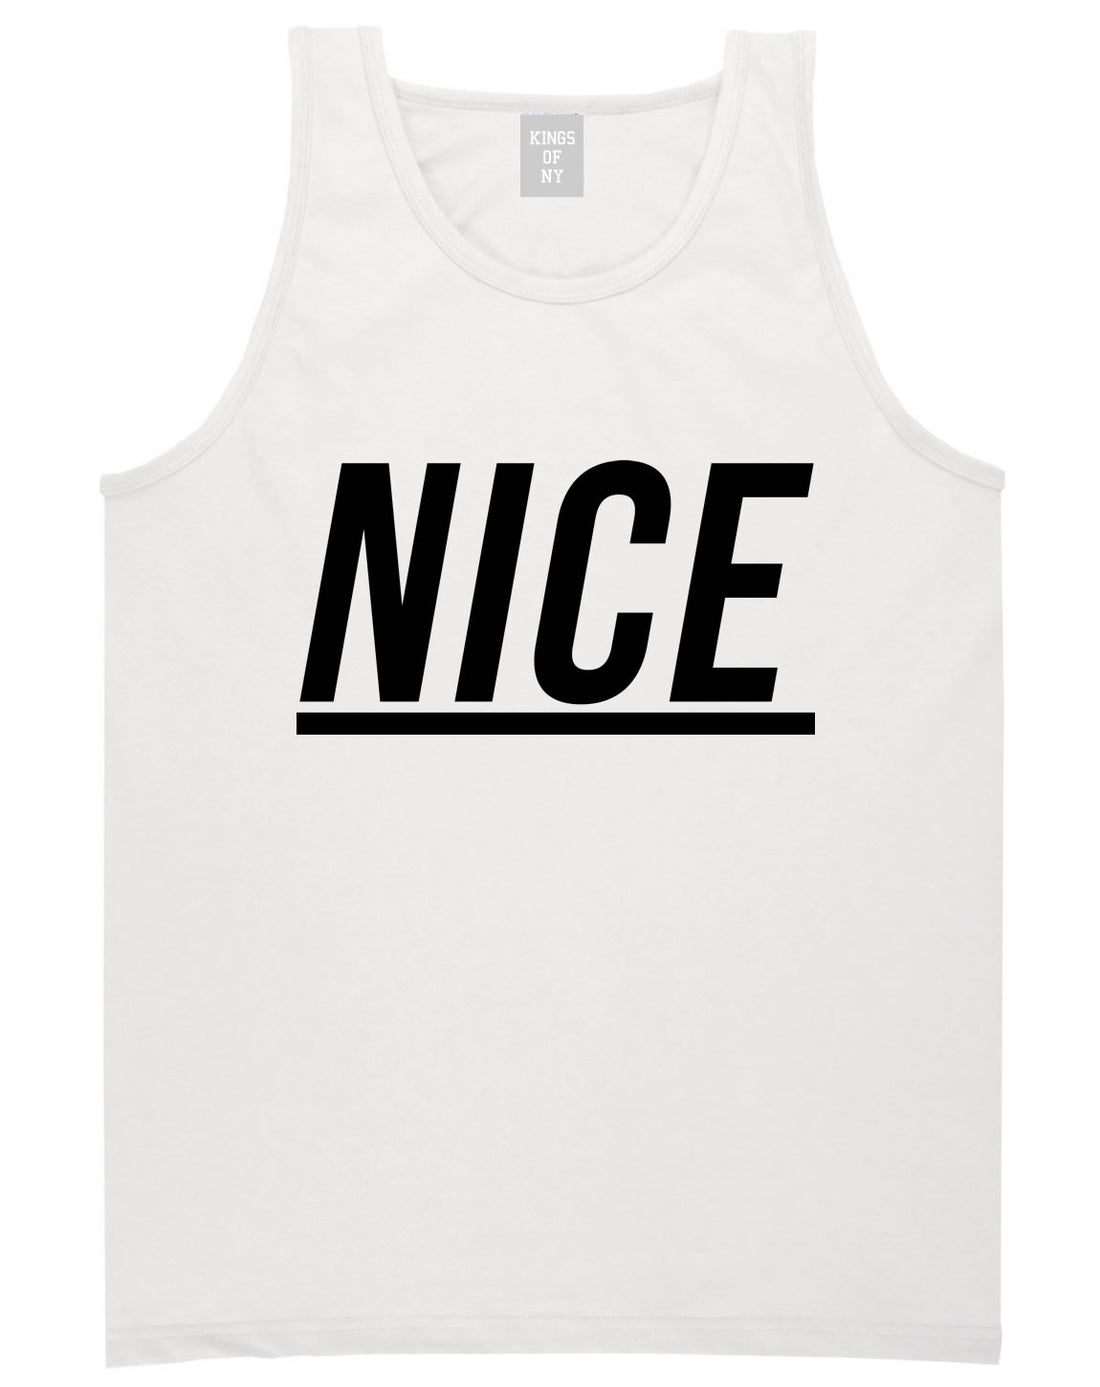 Nice Tank Top in White by Kings Of NY